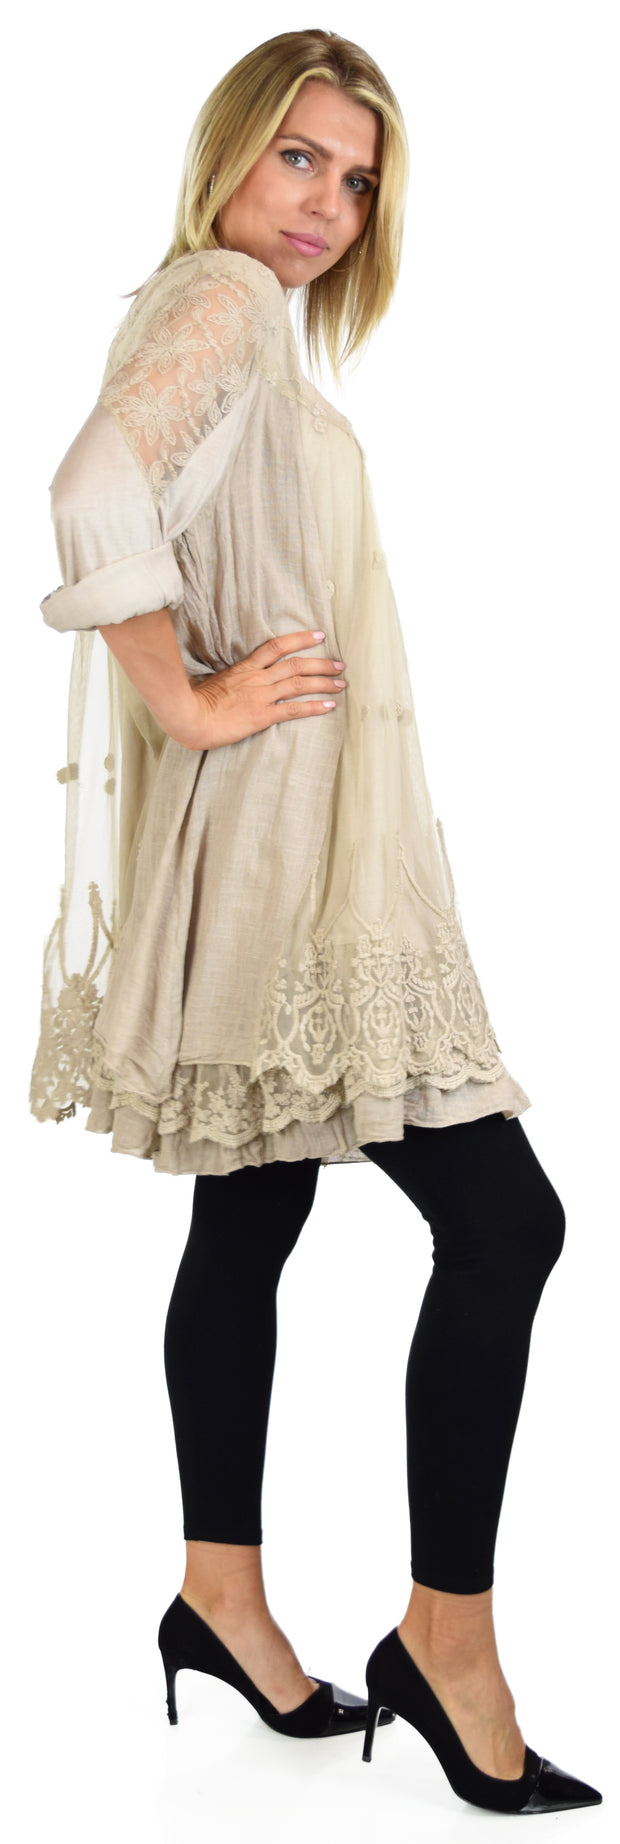 Women Plus Size Lace Blouse Top with Roll Up Sleeves